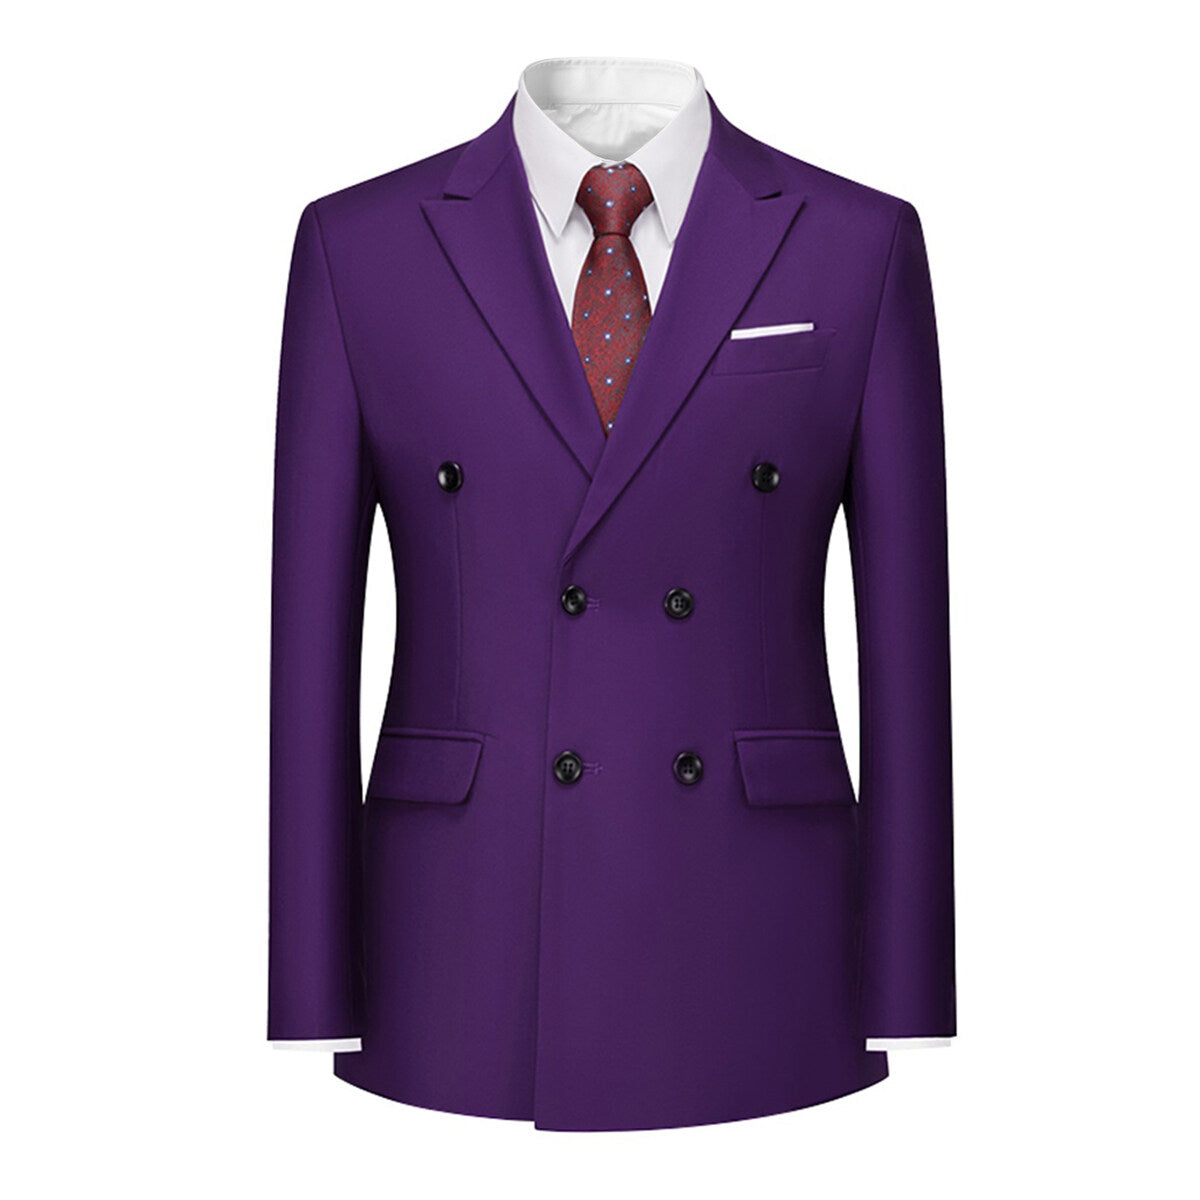 Men's Solid Color Double Breasted Business Suit Purple